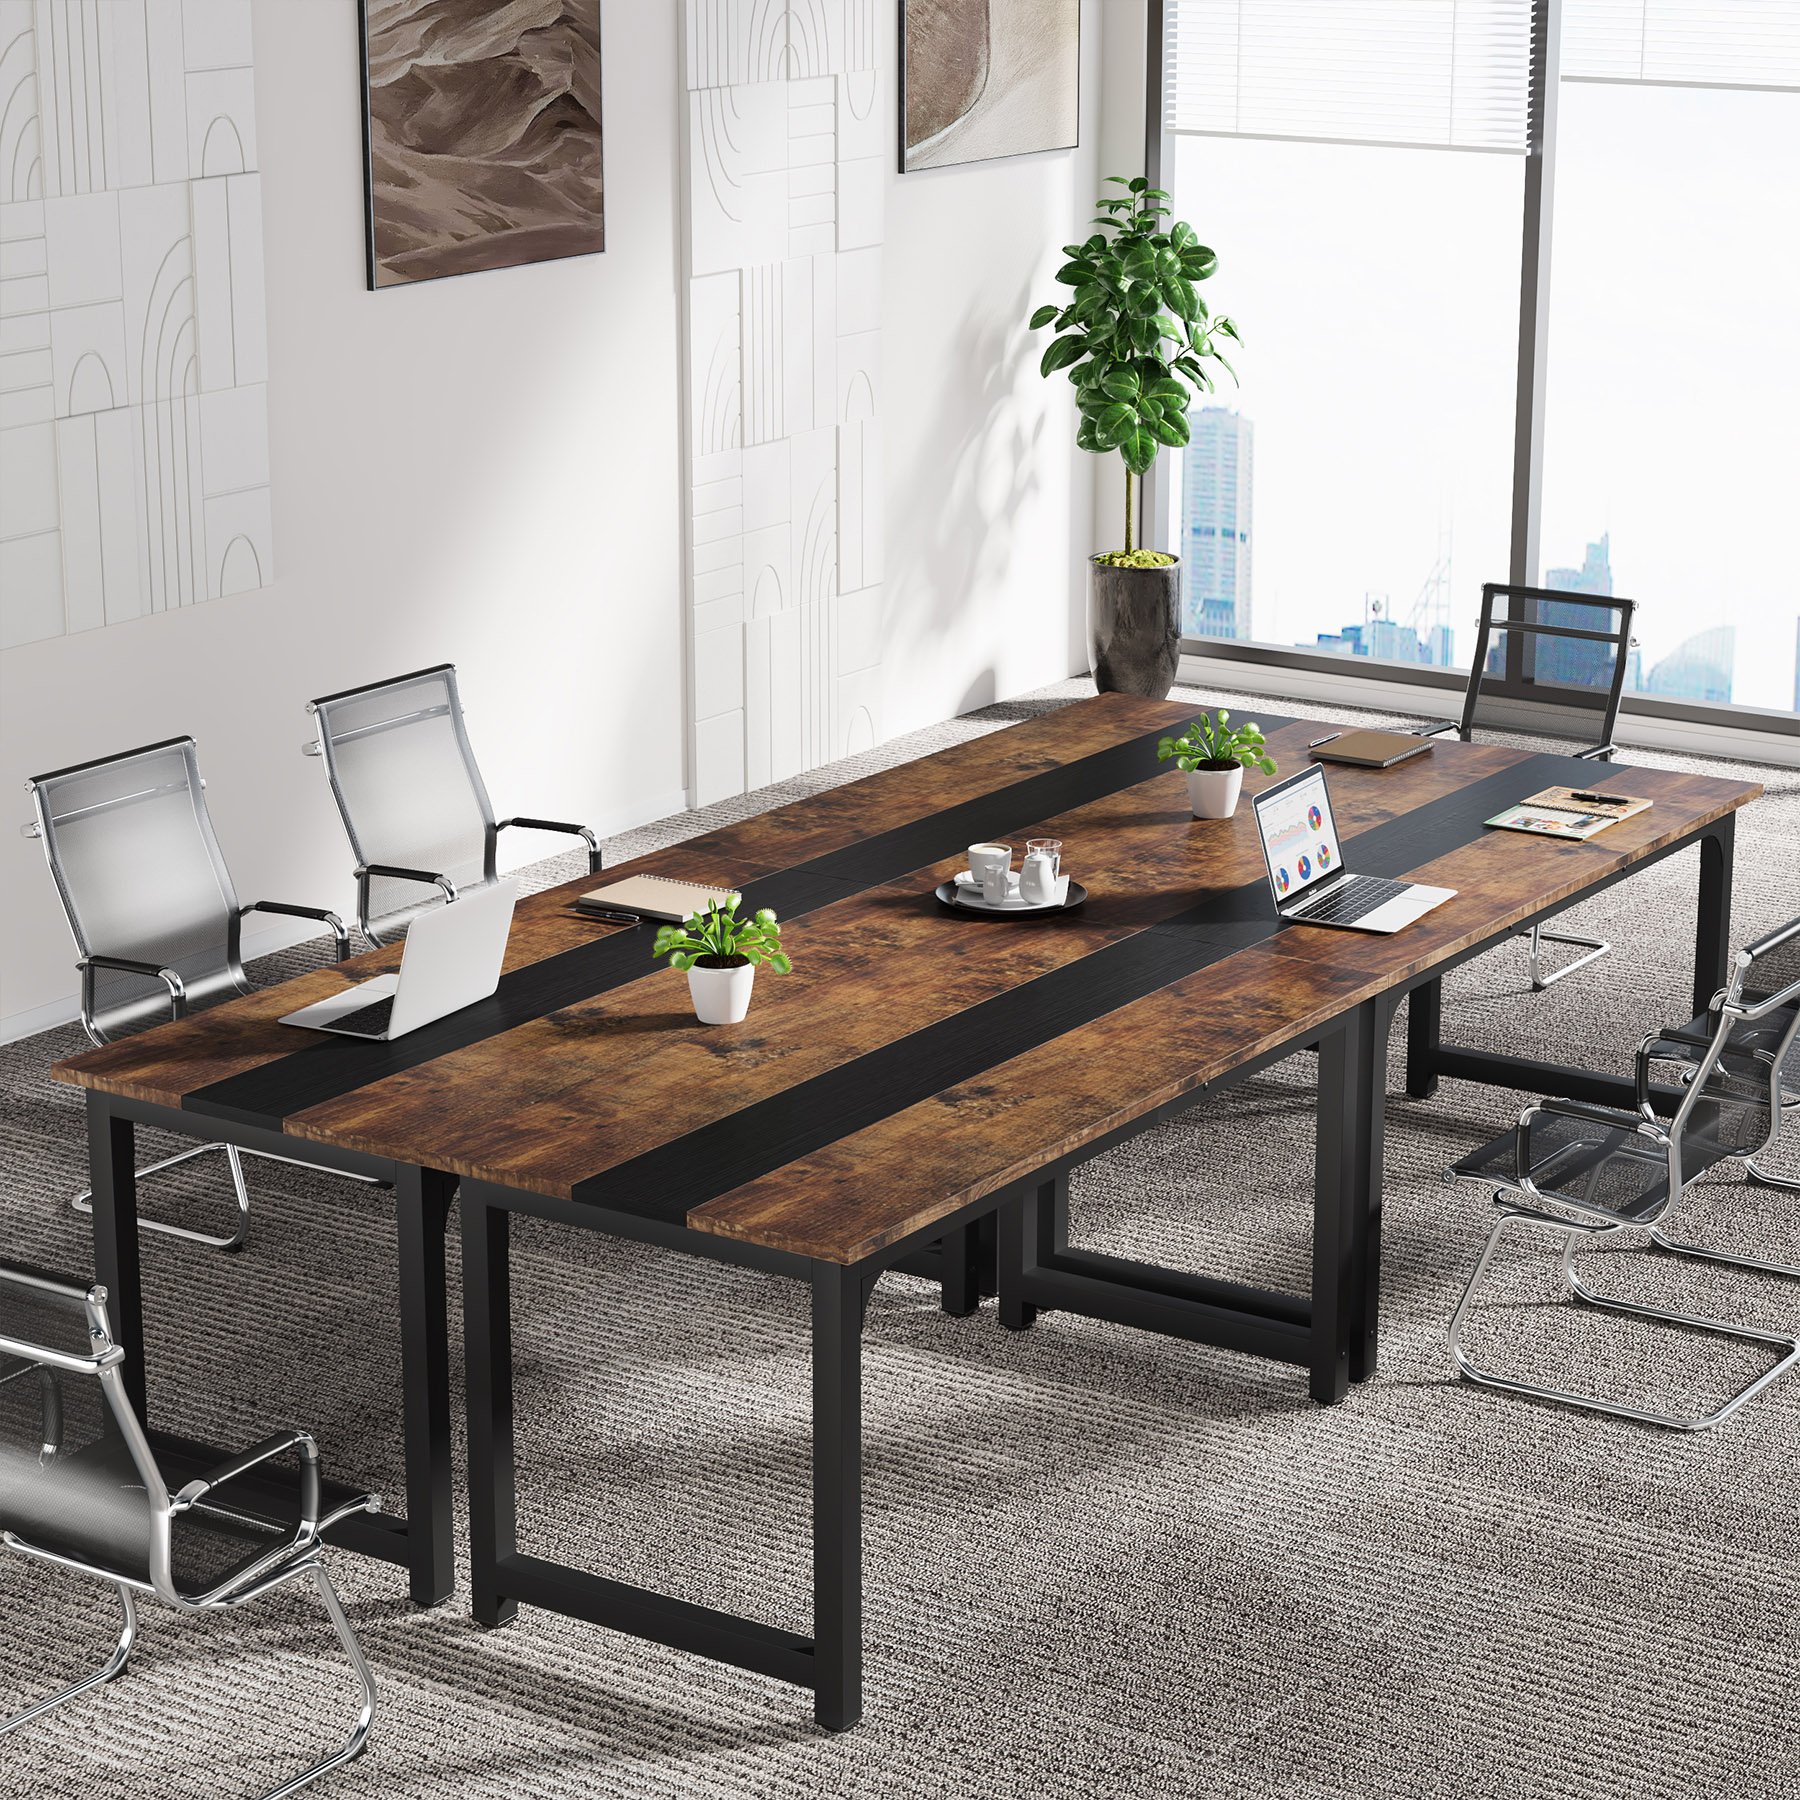 Conference Table, 6FT Meeting Seminar Table Rectangular Meeting Room Desk